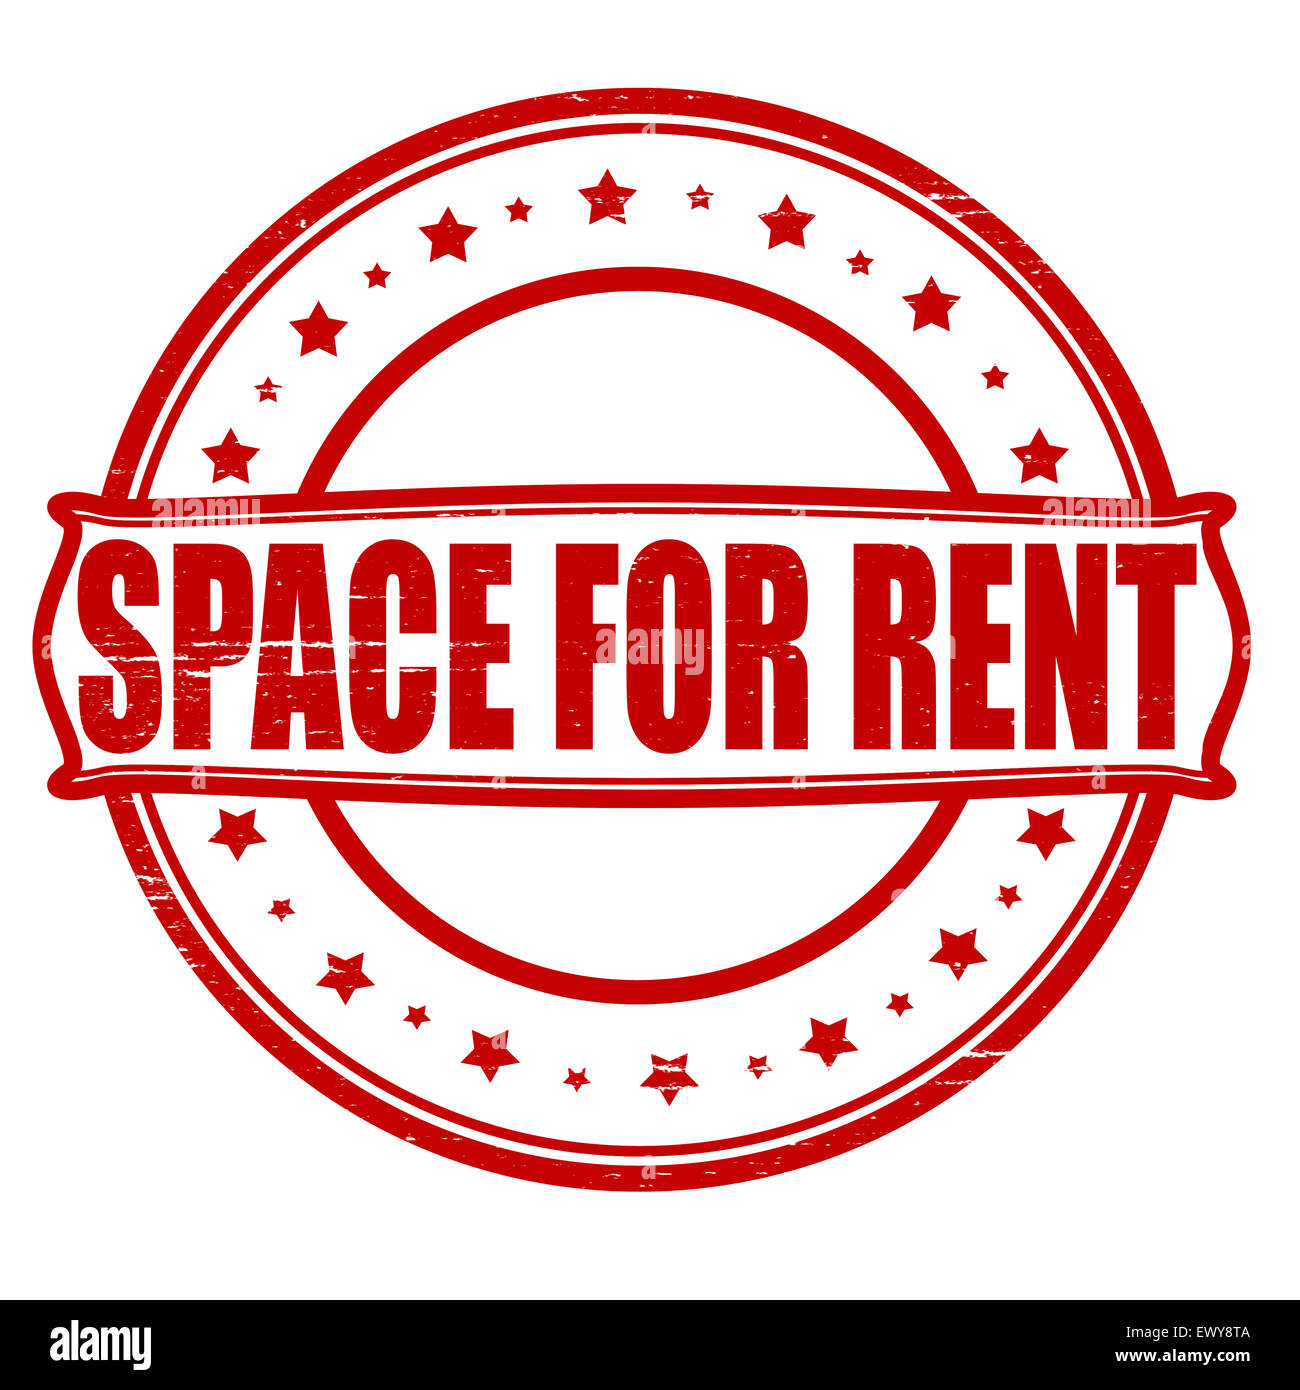 Stamp with text space for rent inside, illustration Stock Photo